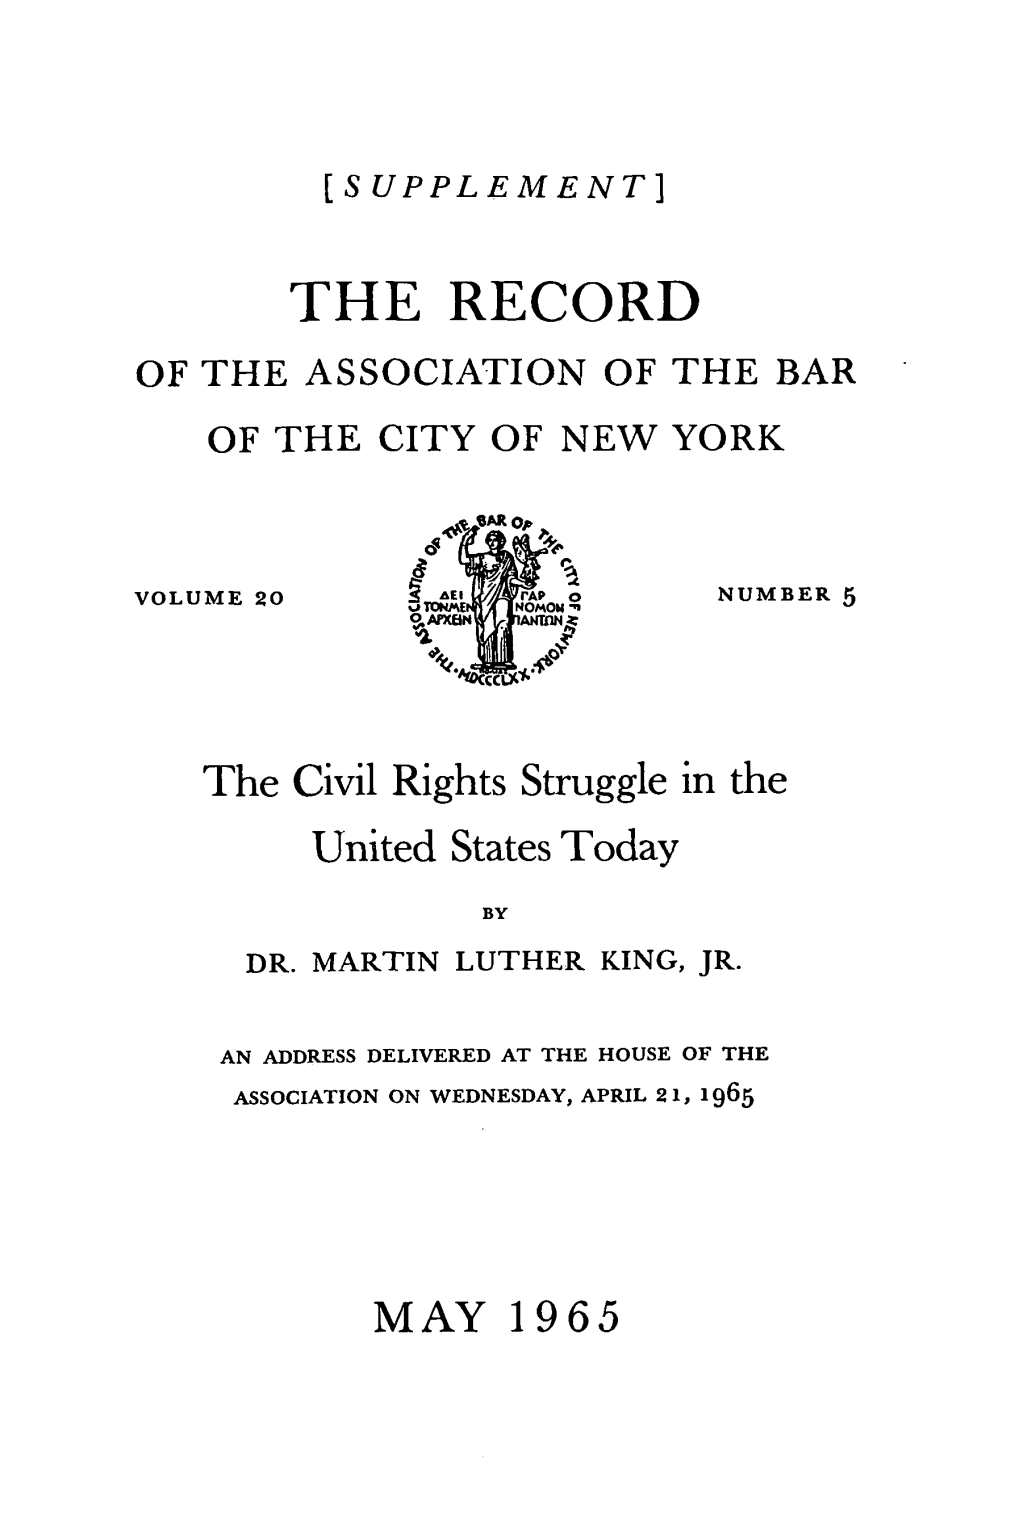 The Record of the Association of the Bar of the City of New York